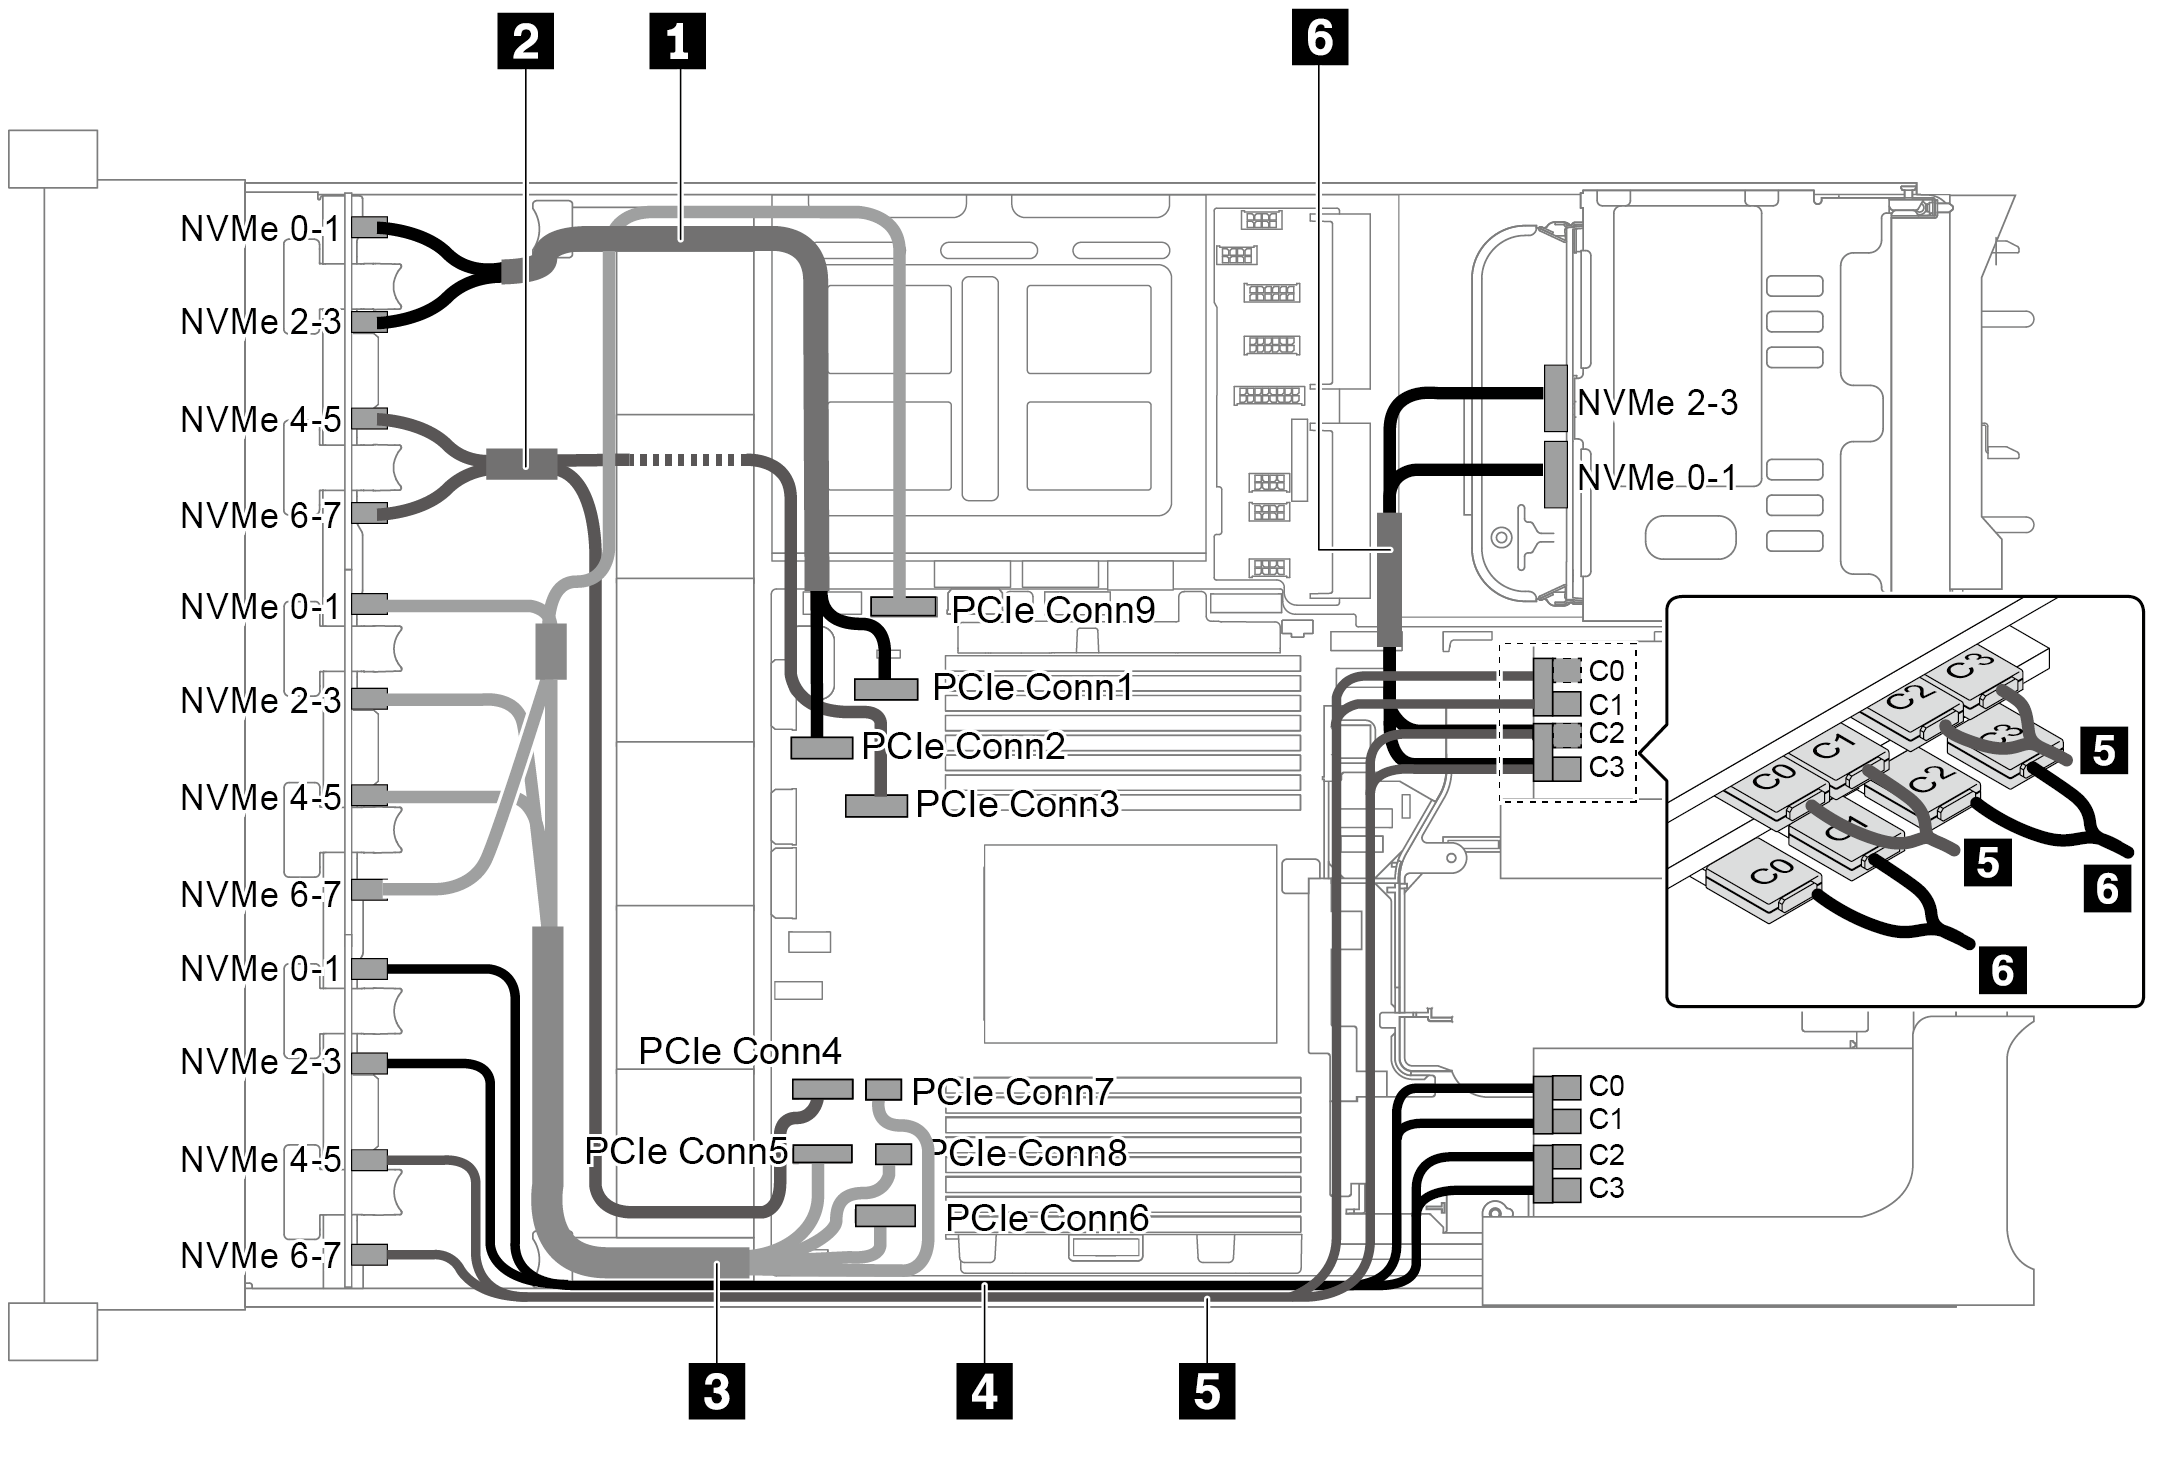 Cable routing for configuration with three 8 x 2.5" NVMe front backplanes, one rear drive cage (NVMe), and three 810-4P or 1610-4P NVMe switch cards